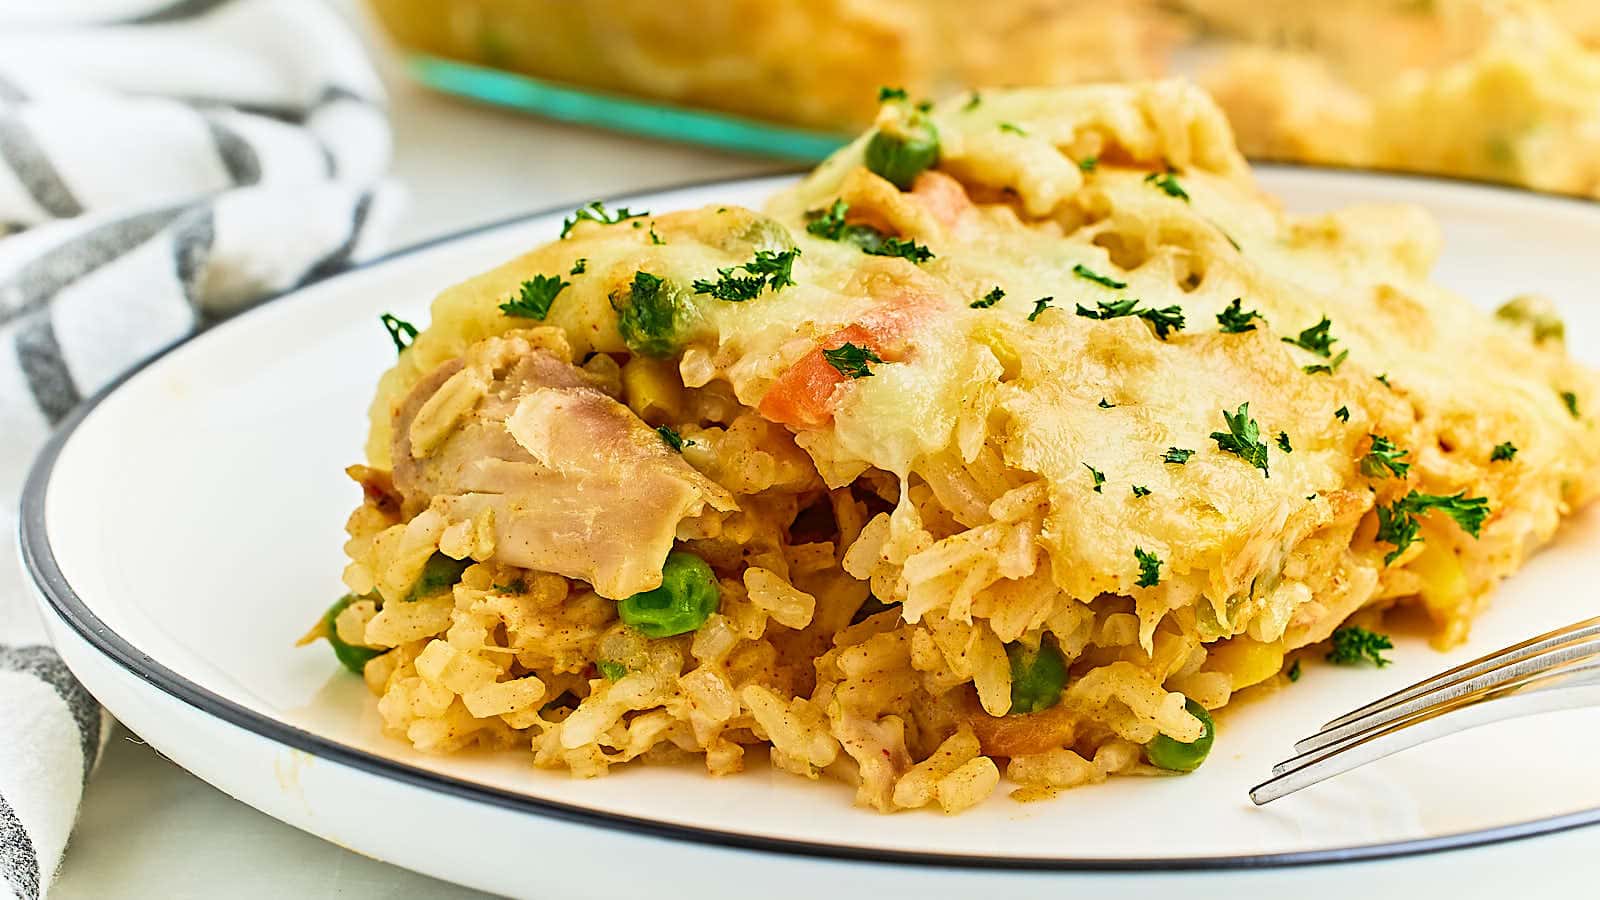 <p>Chicken and Rice Casserole is the perfect comfort food that is both delicious and easy to make. Juicy rotisserie chicken, fluffy rice, and veggies are baked perfectly with bubbly, golden cheese.</p><p><strong>Get the Recipe: <a href="https://cheerfulcook.com/chicken-and-rice-casserole/" rel="noreferrer noopener">Chicken And Rice Casserole</a></strong></p>